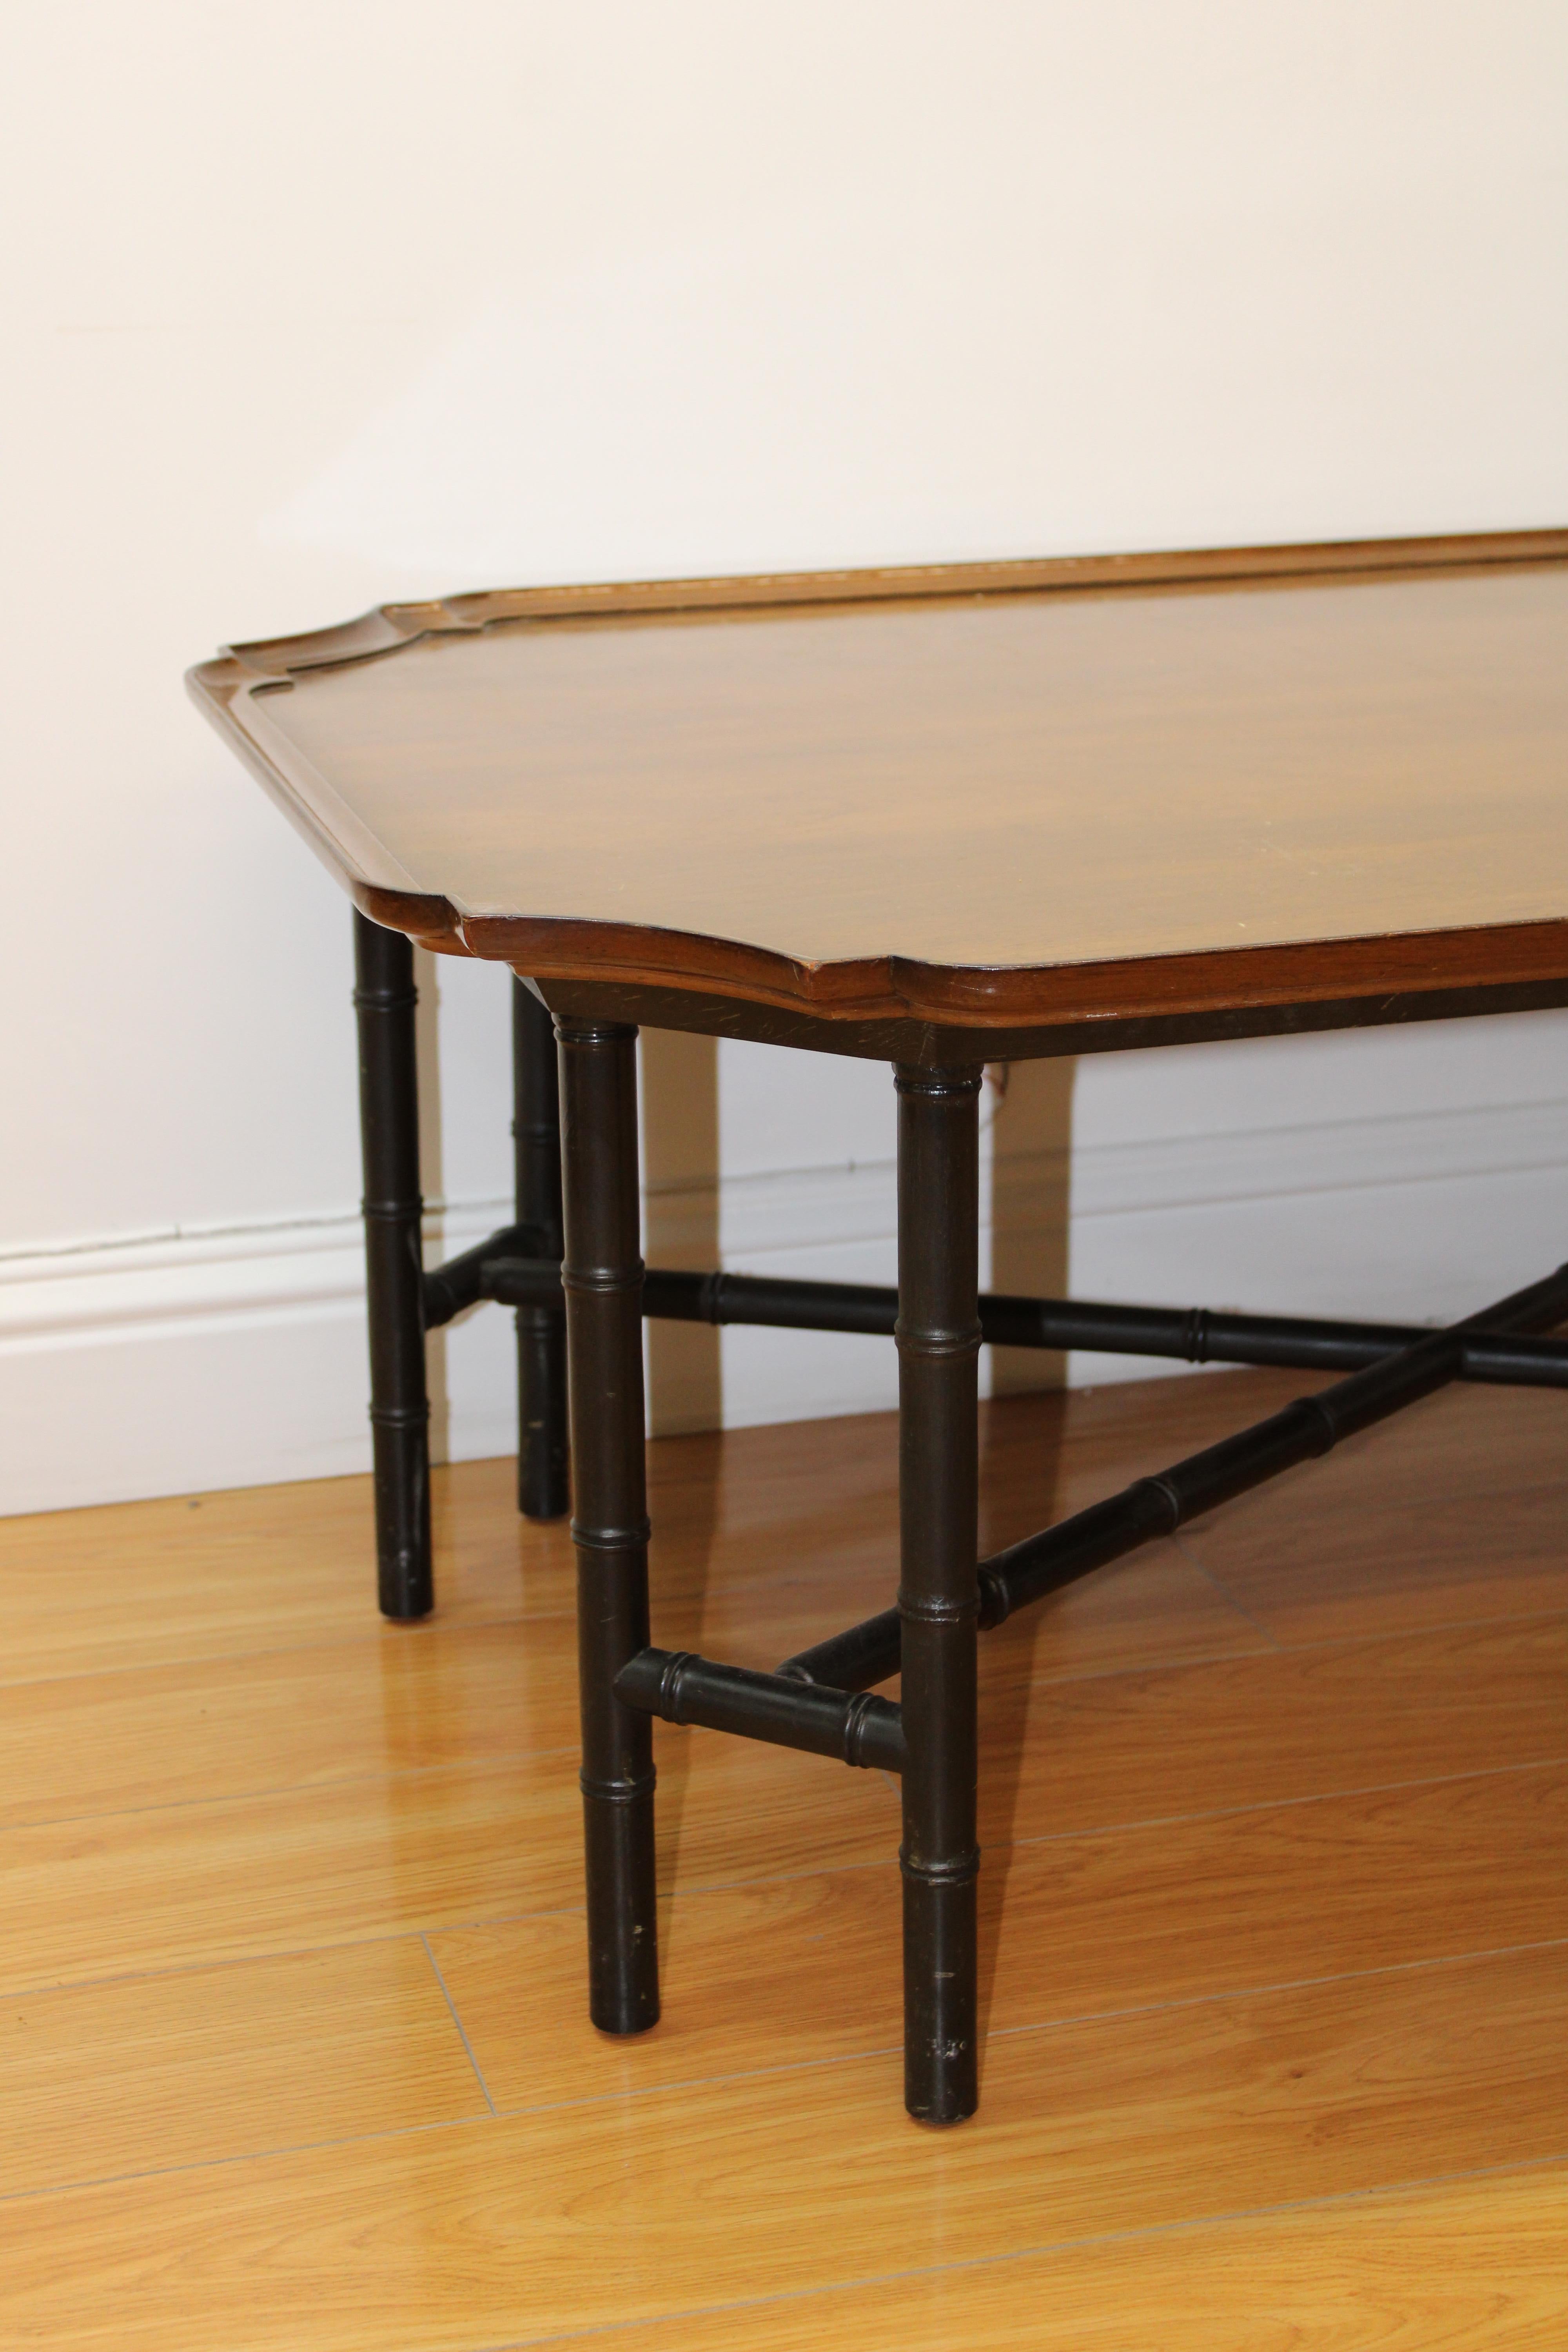 octagonal coffee table with glass top